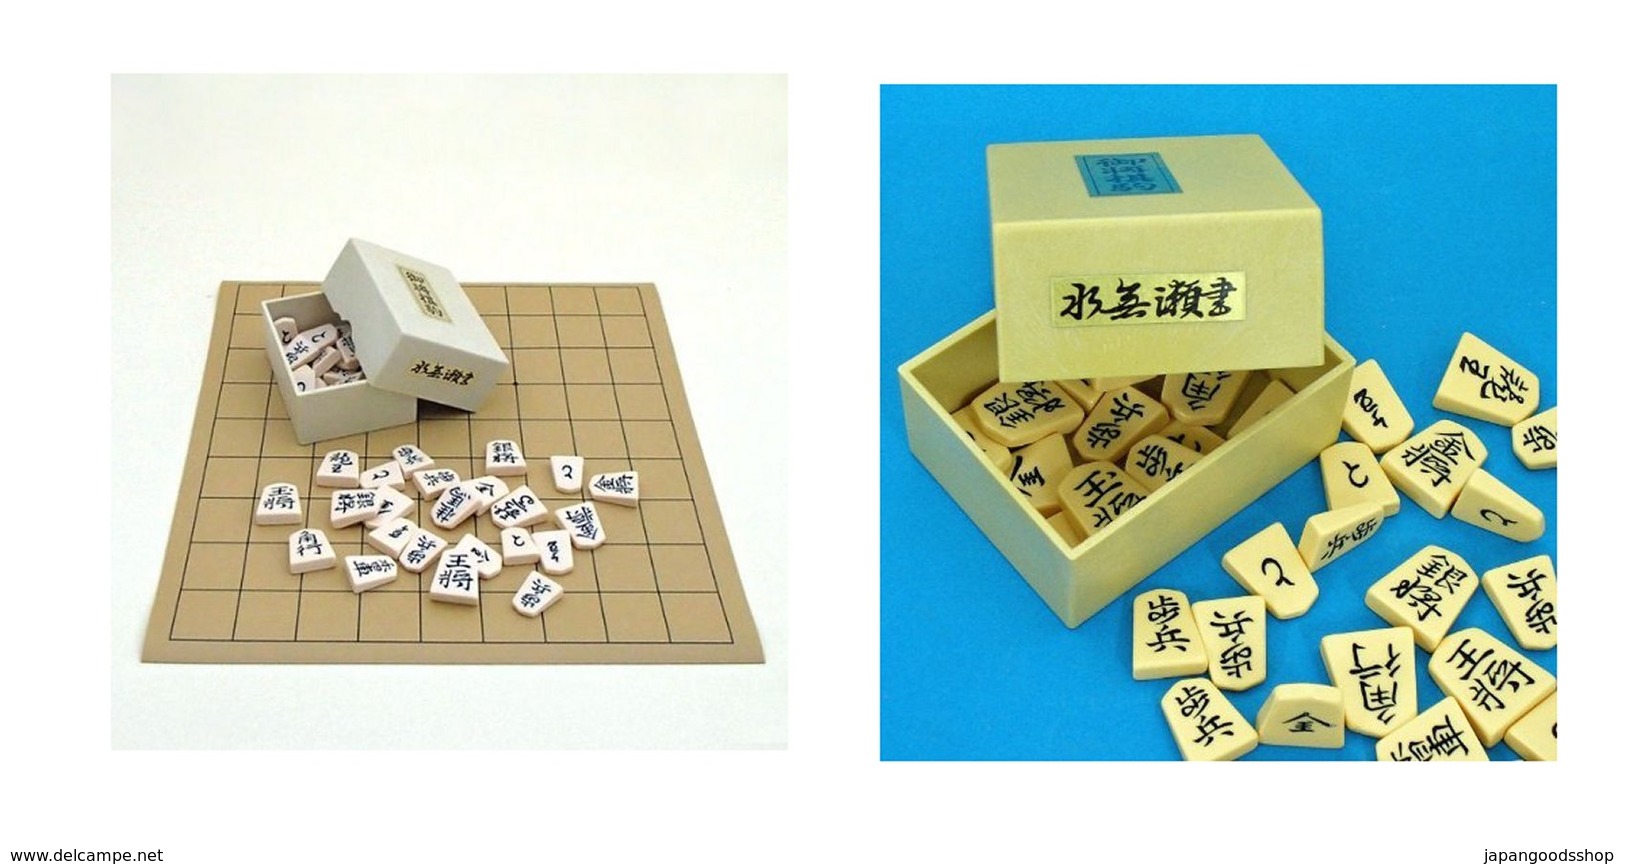 Yellow Mountain Imports Shogi Japanese Chess Game Set - Wooden Board with  Drawers and Traditional Koma Playing Pieces